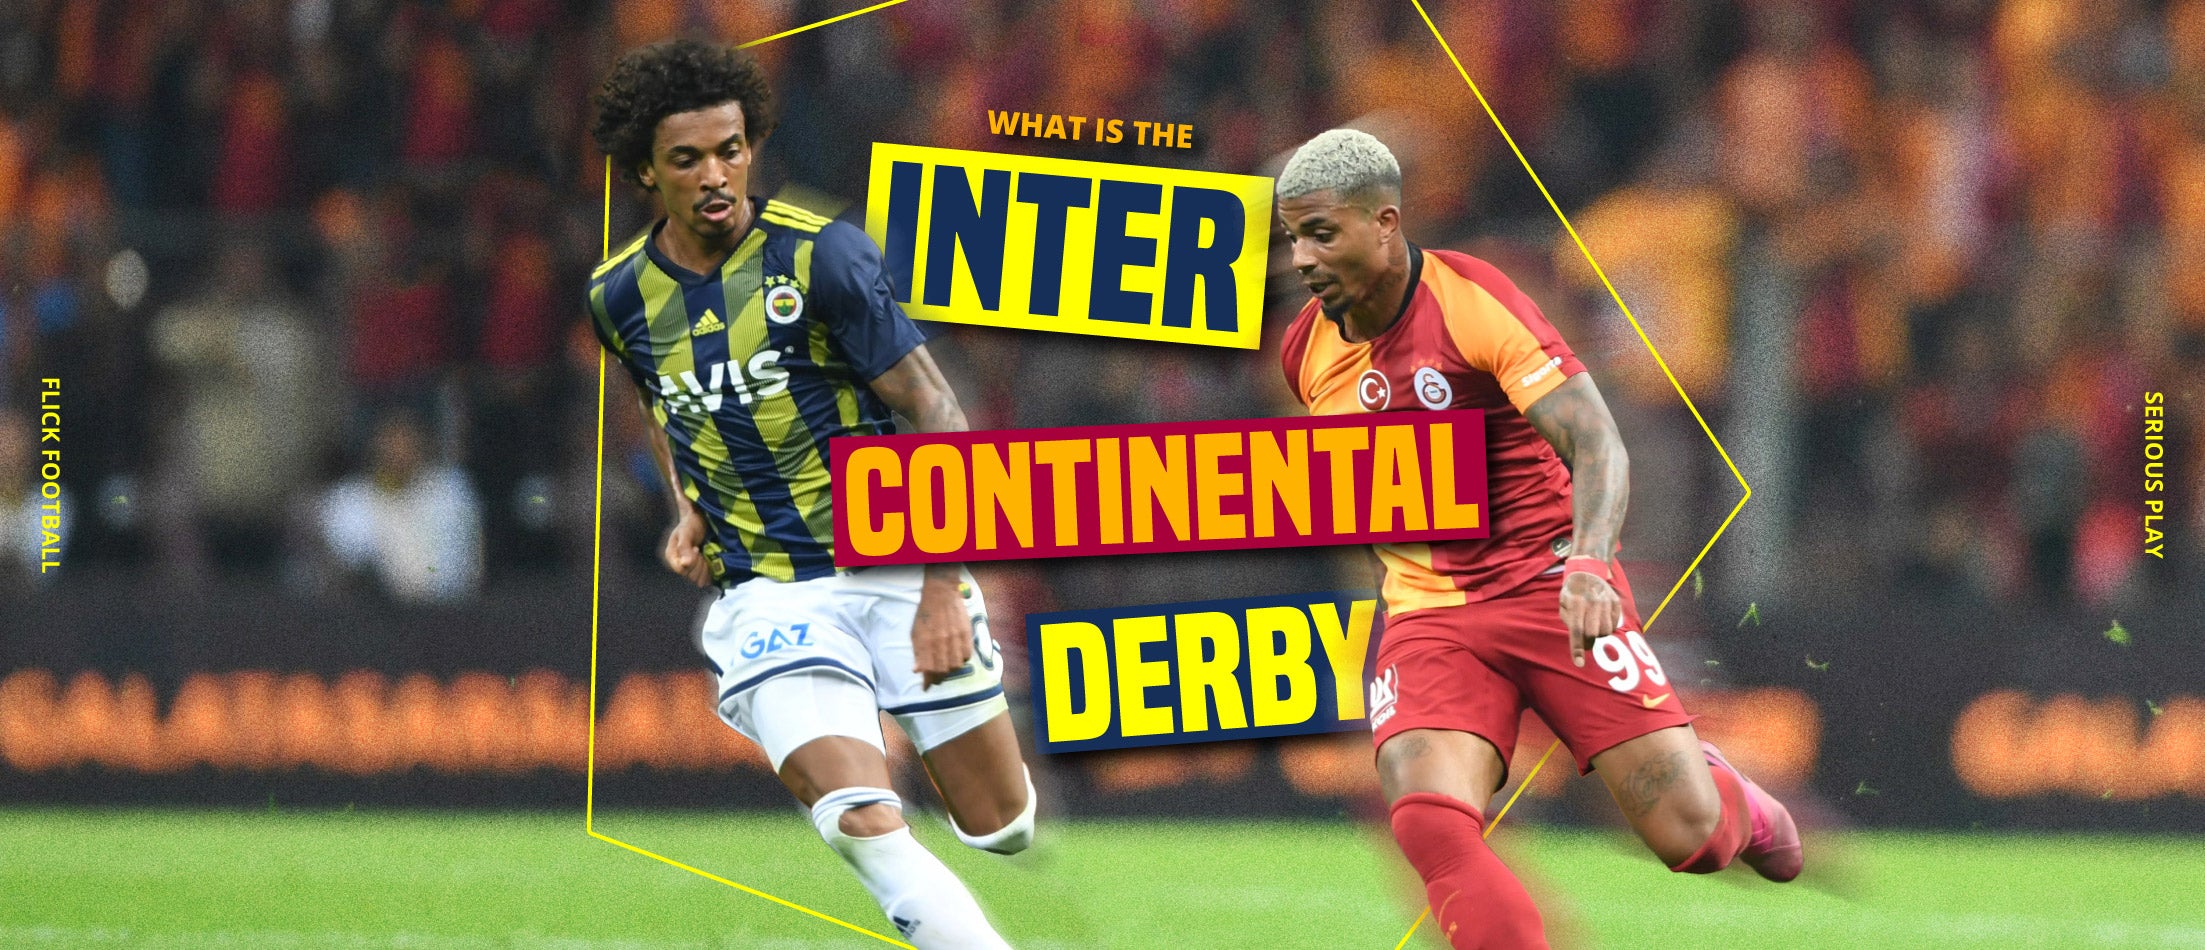 What is the Intercontinental Derby?